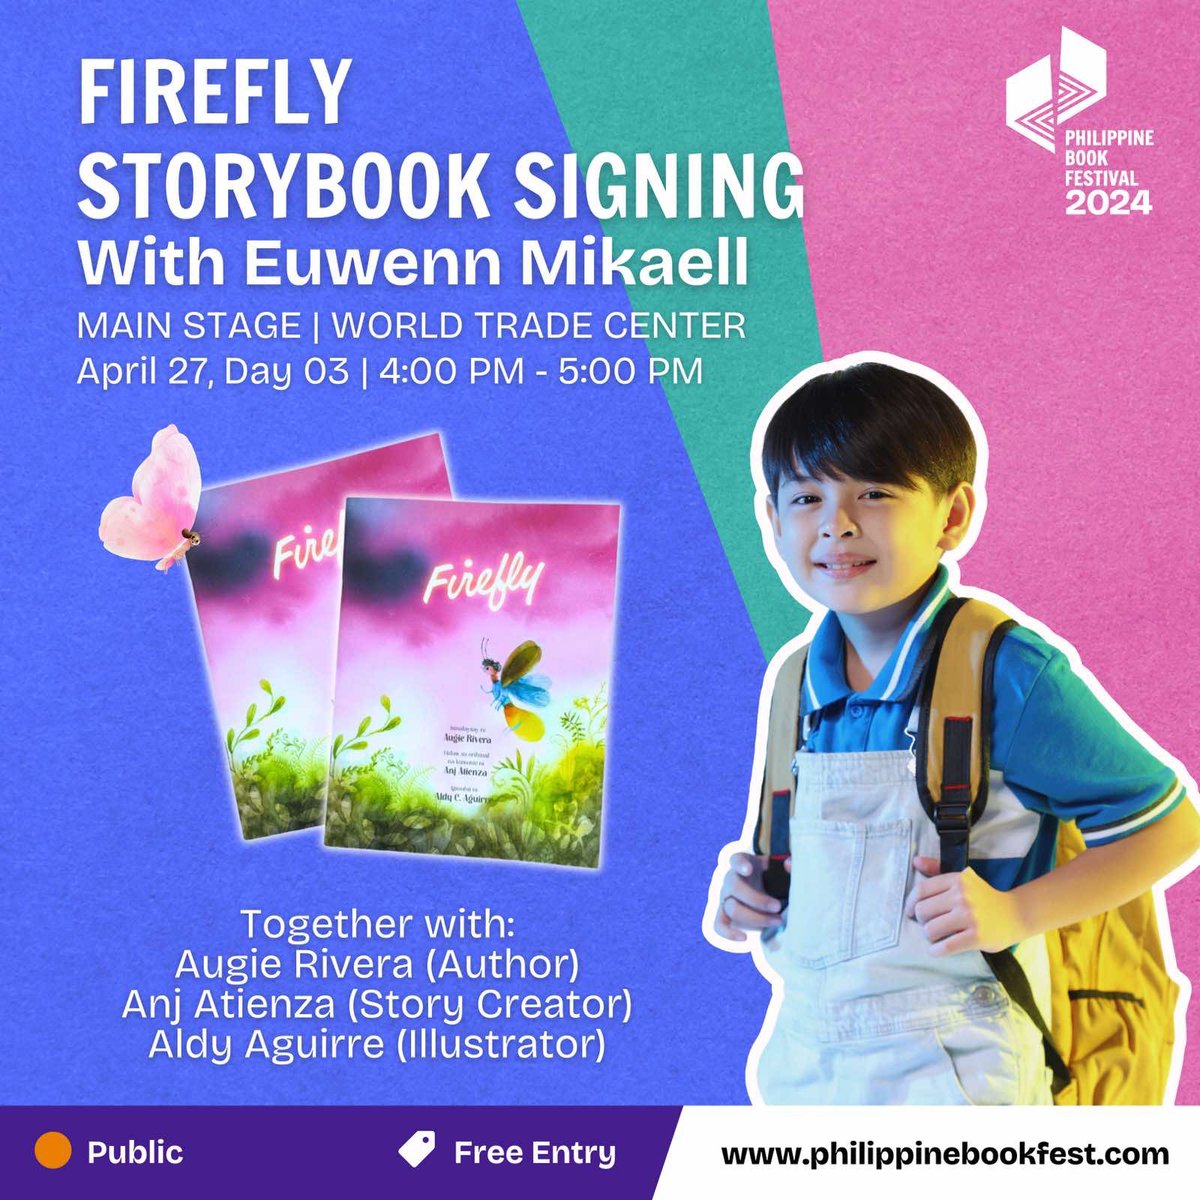 Join Euwenn Mikaell at the main stage of the Philippine Book Festival for the ‘Firefly Storybook Signing’ this coming April 27, Saturday, at 4:00 PM! ✨ #EuwennMikaell #Firefly #FireflyStoryBook #NBDB #ReadPinas #AklatParaSaLahat #PHBookFestival #PBF2024